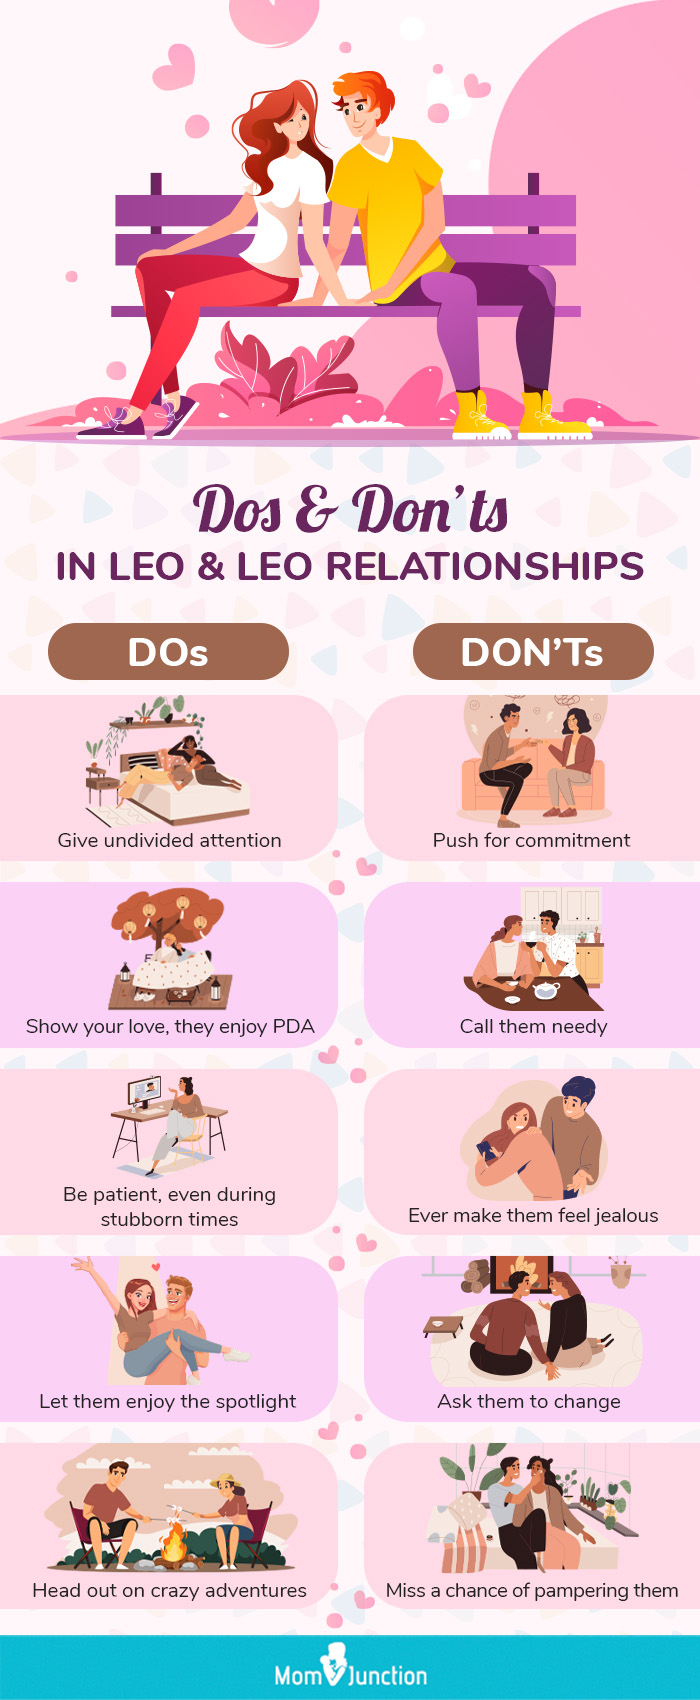 dos and donts in leo & leo relationships [infographic]